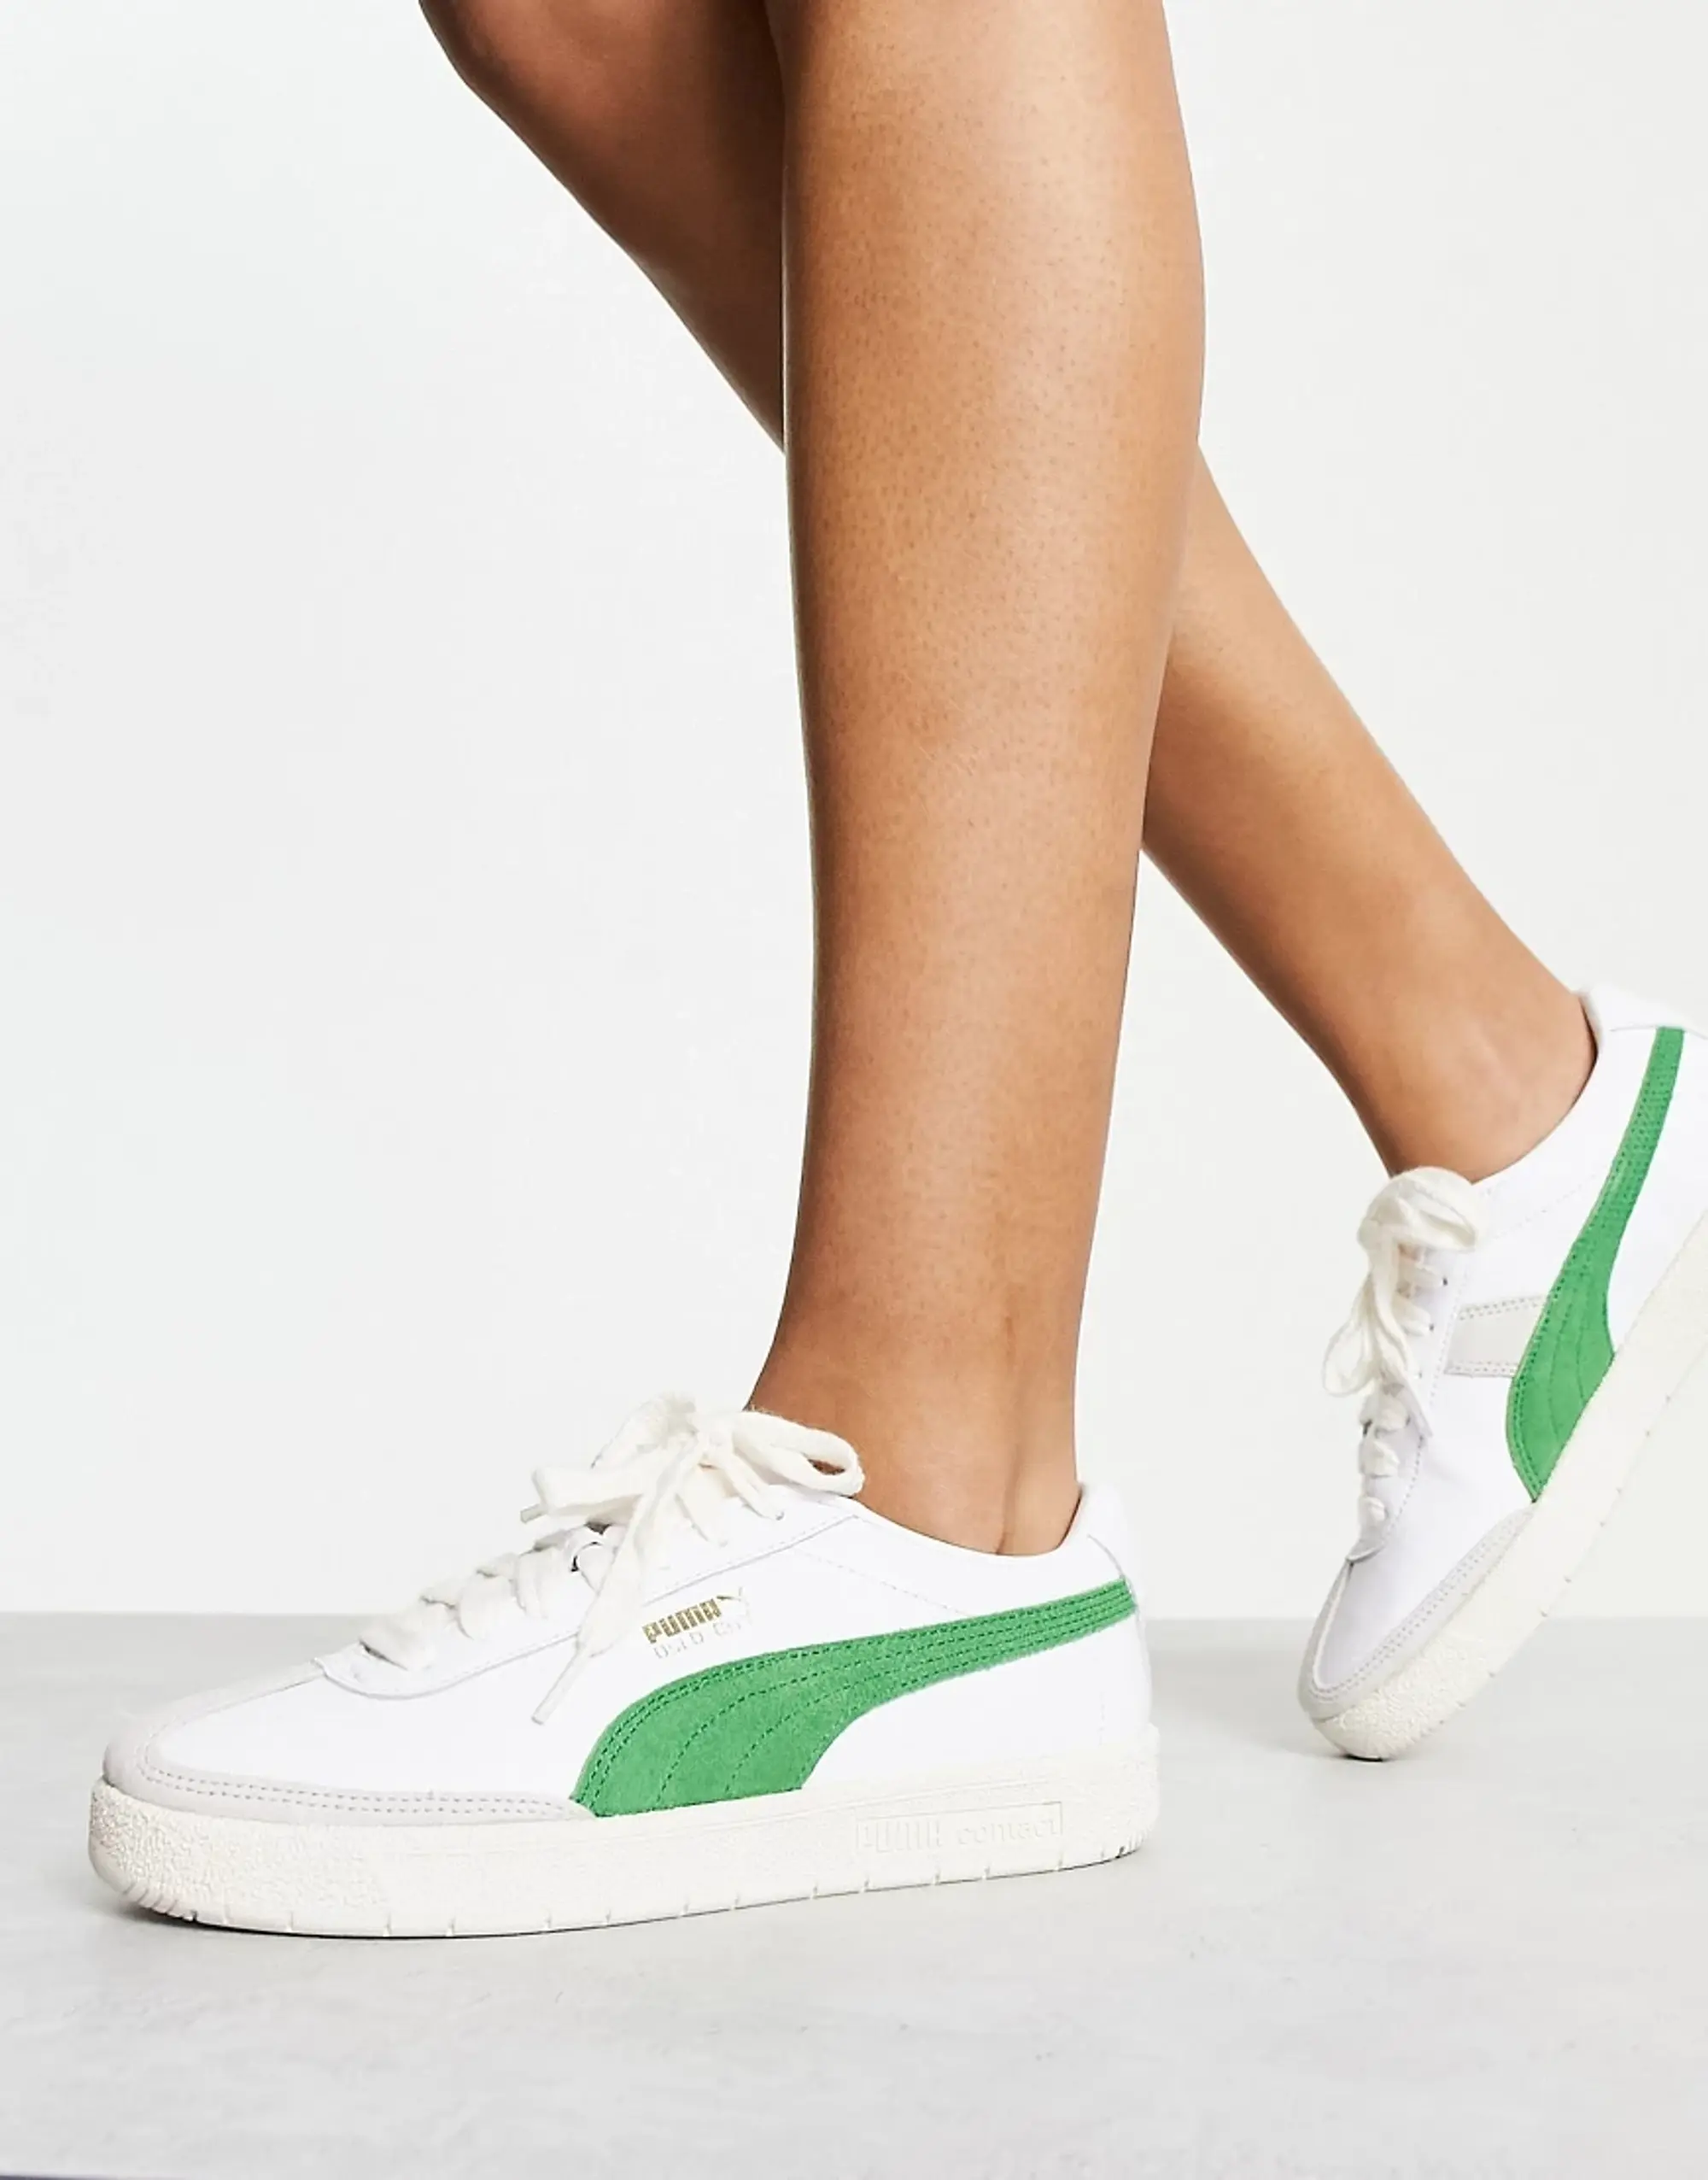 Puma Olso City Trainers In White And Green